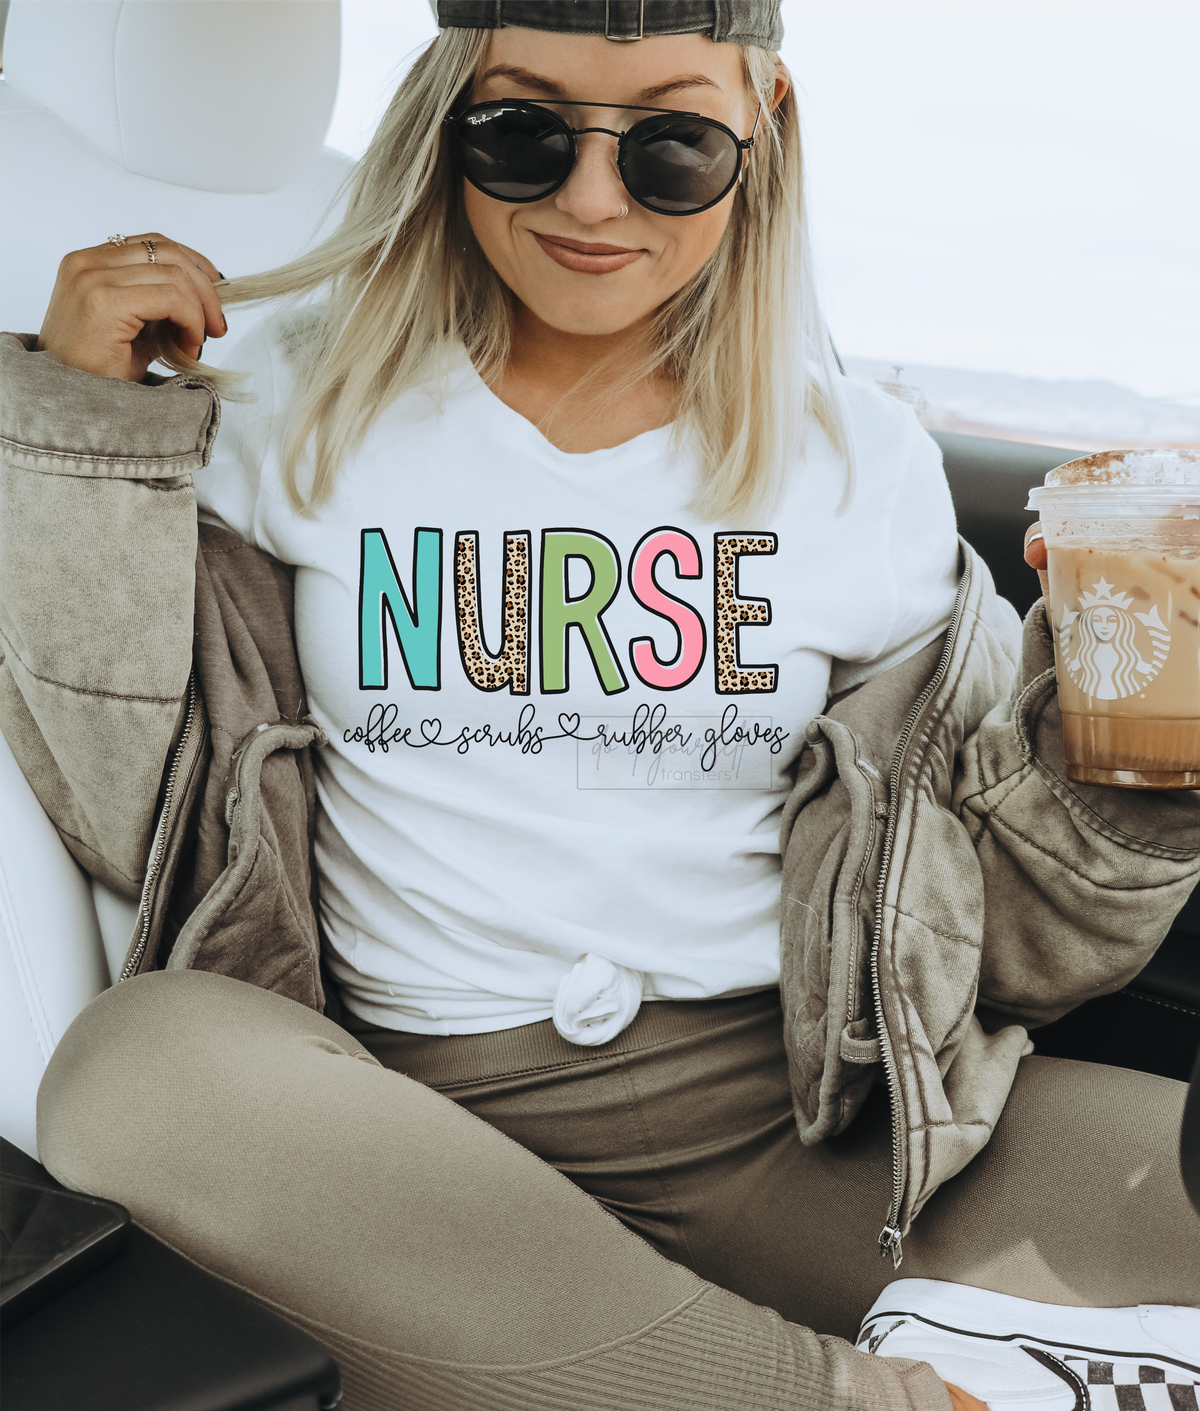 NURSE Coffee Scrubs Rubber Gloves  size ADULT  DTF TRANSFERPRINT TO ORDER